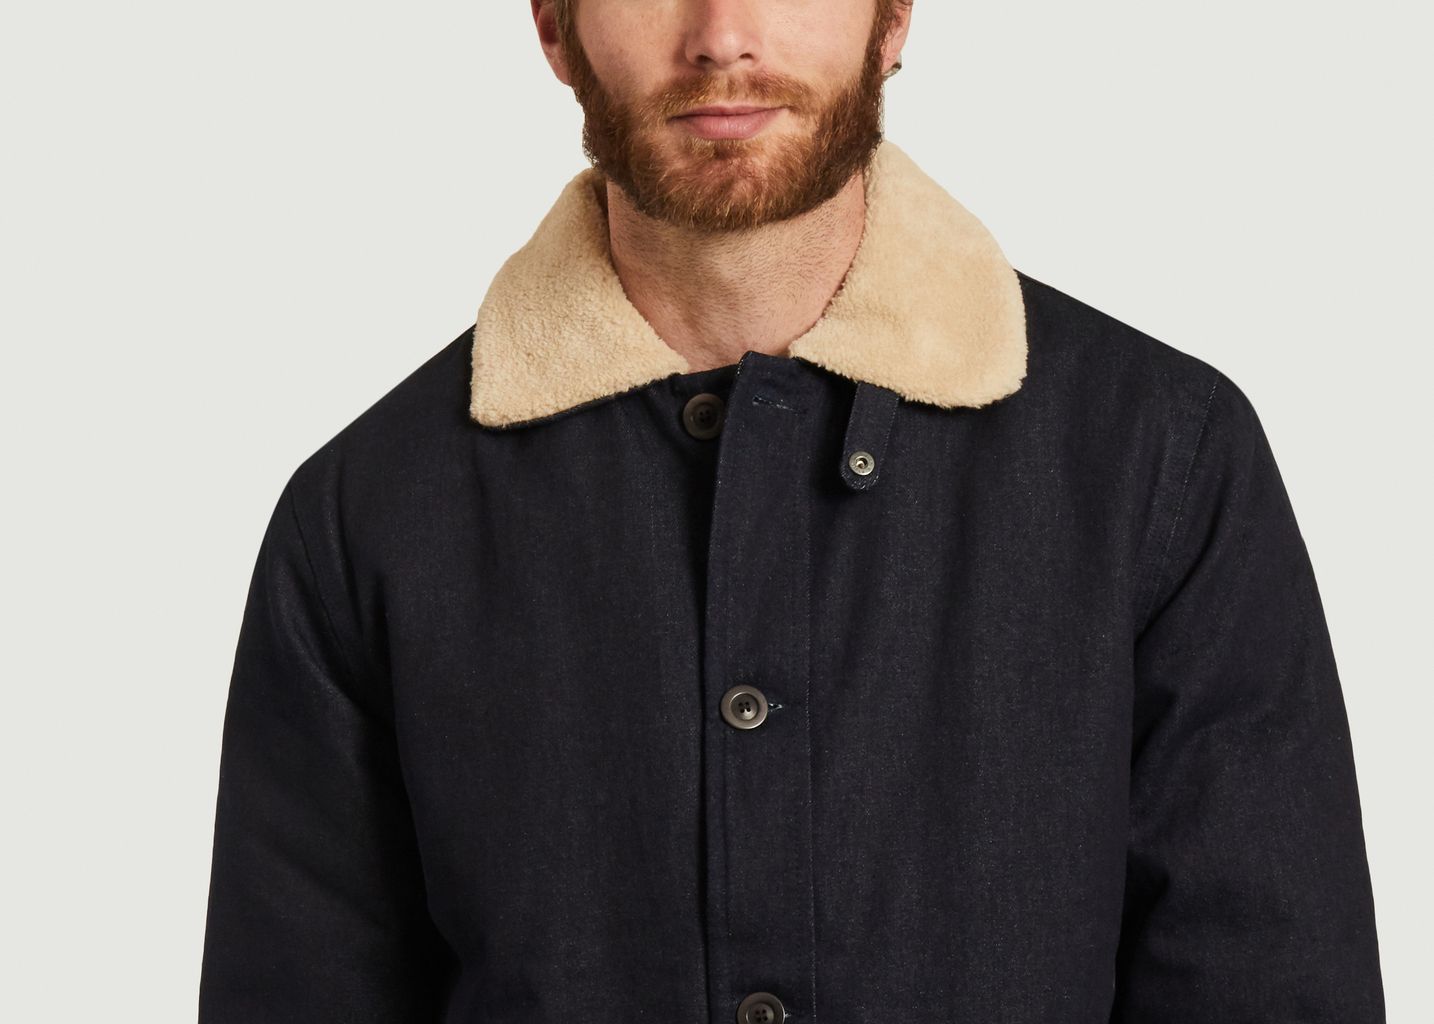 Ernie cotton jacket with faux-fur collar - Olow